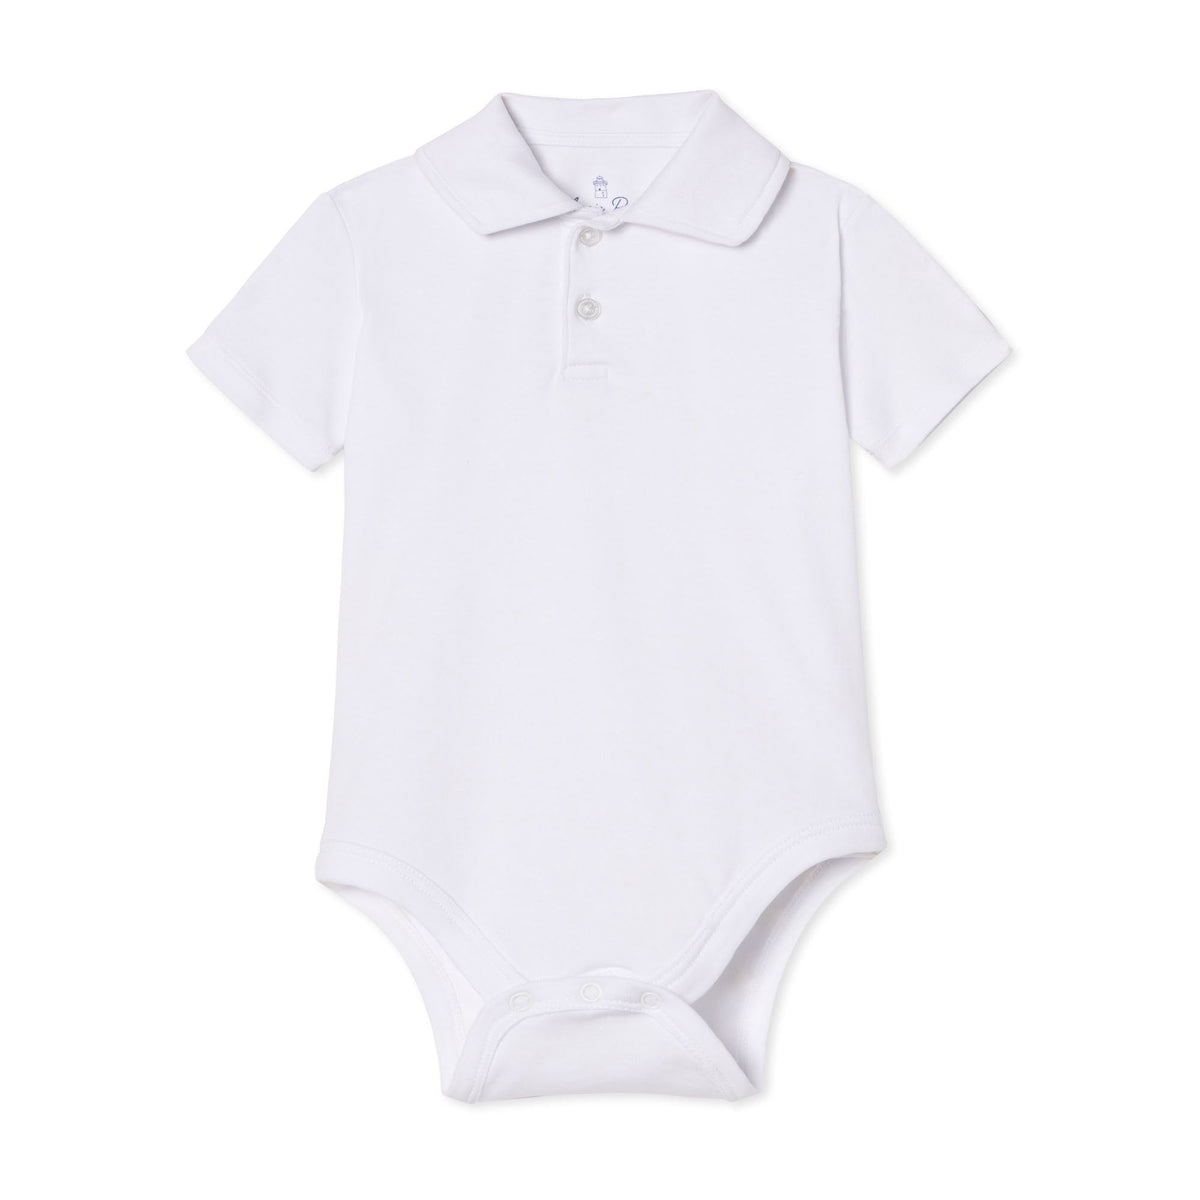 Classic and Preppy Hayes Short Sleeve Polo Onesie, Bright White-Baby Rompers-Bright White-0-3M-CPC - Classic Prep Childrenswear